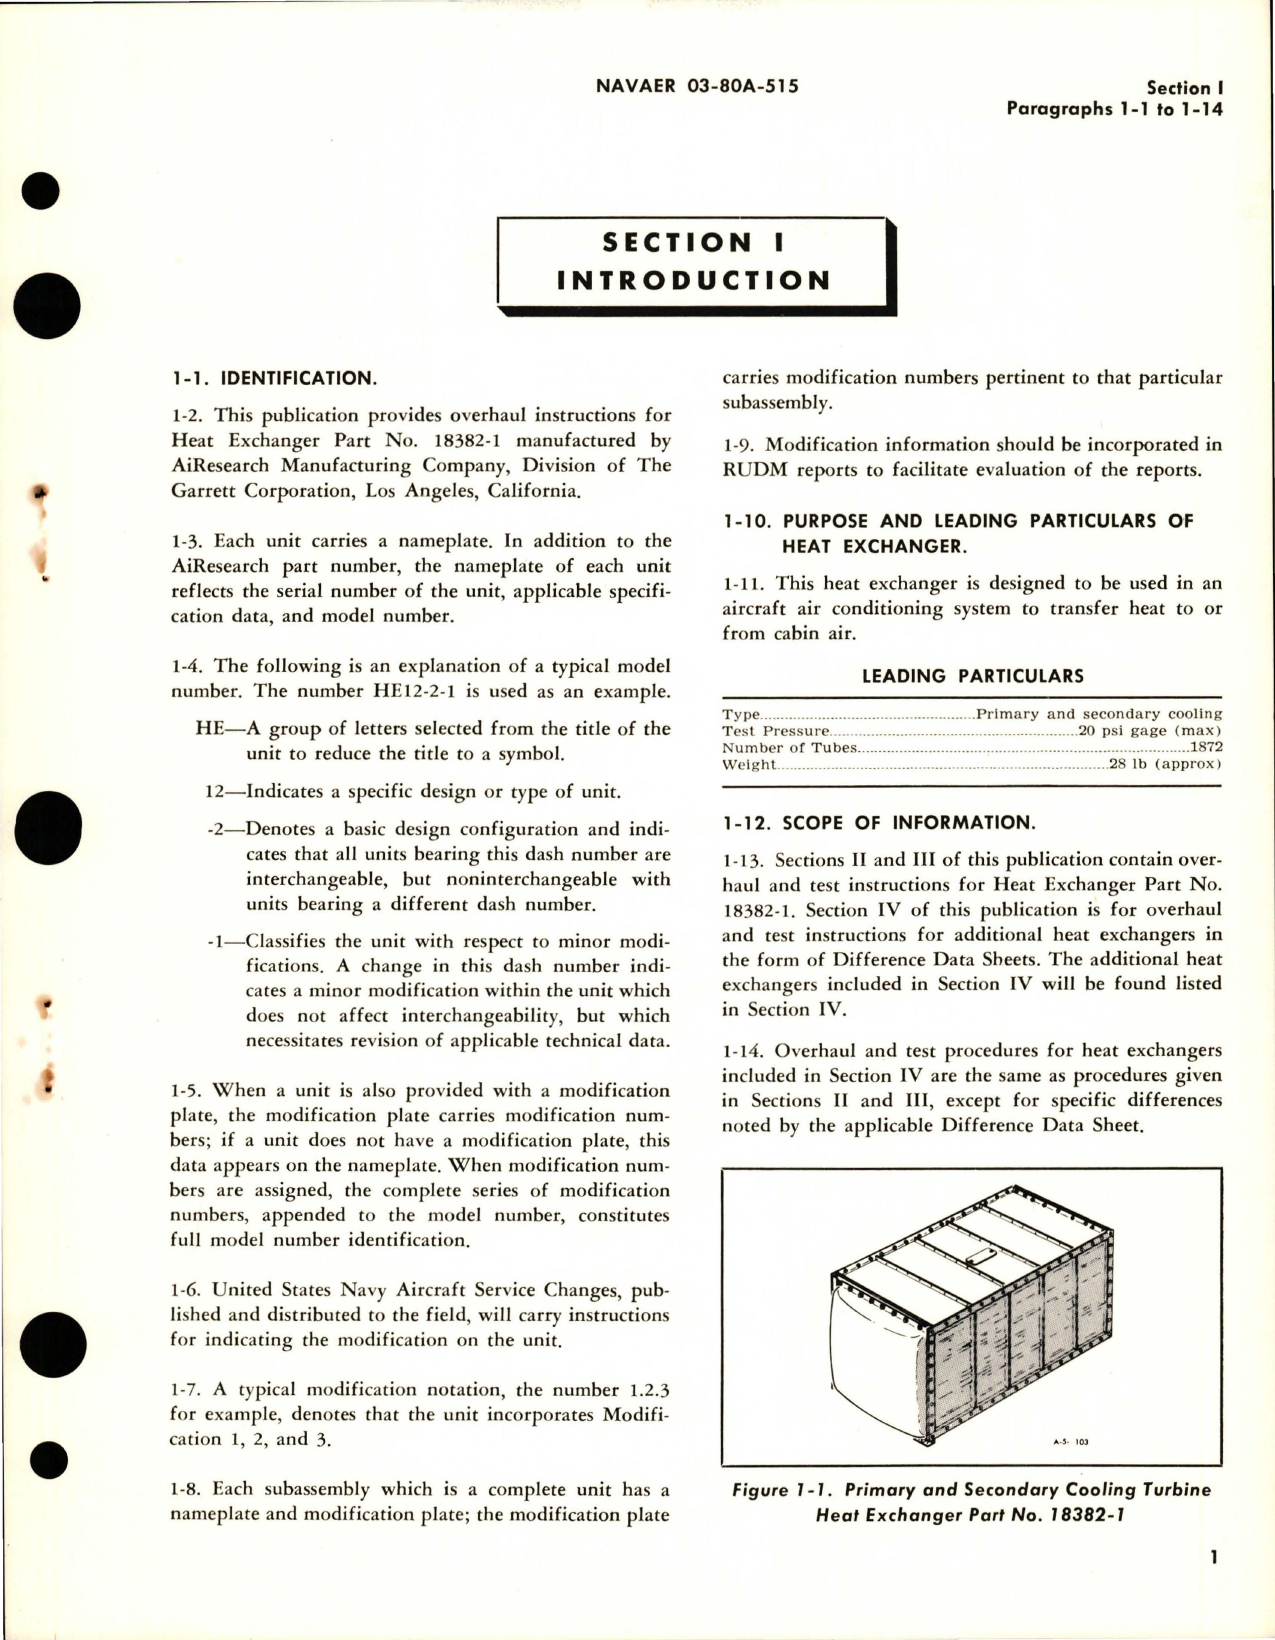 Sample page 5 from AirCorps Library document: Overhaul Instructions for Heat Exchangers 